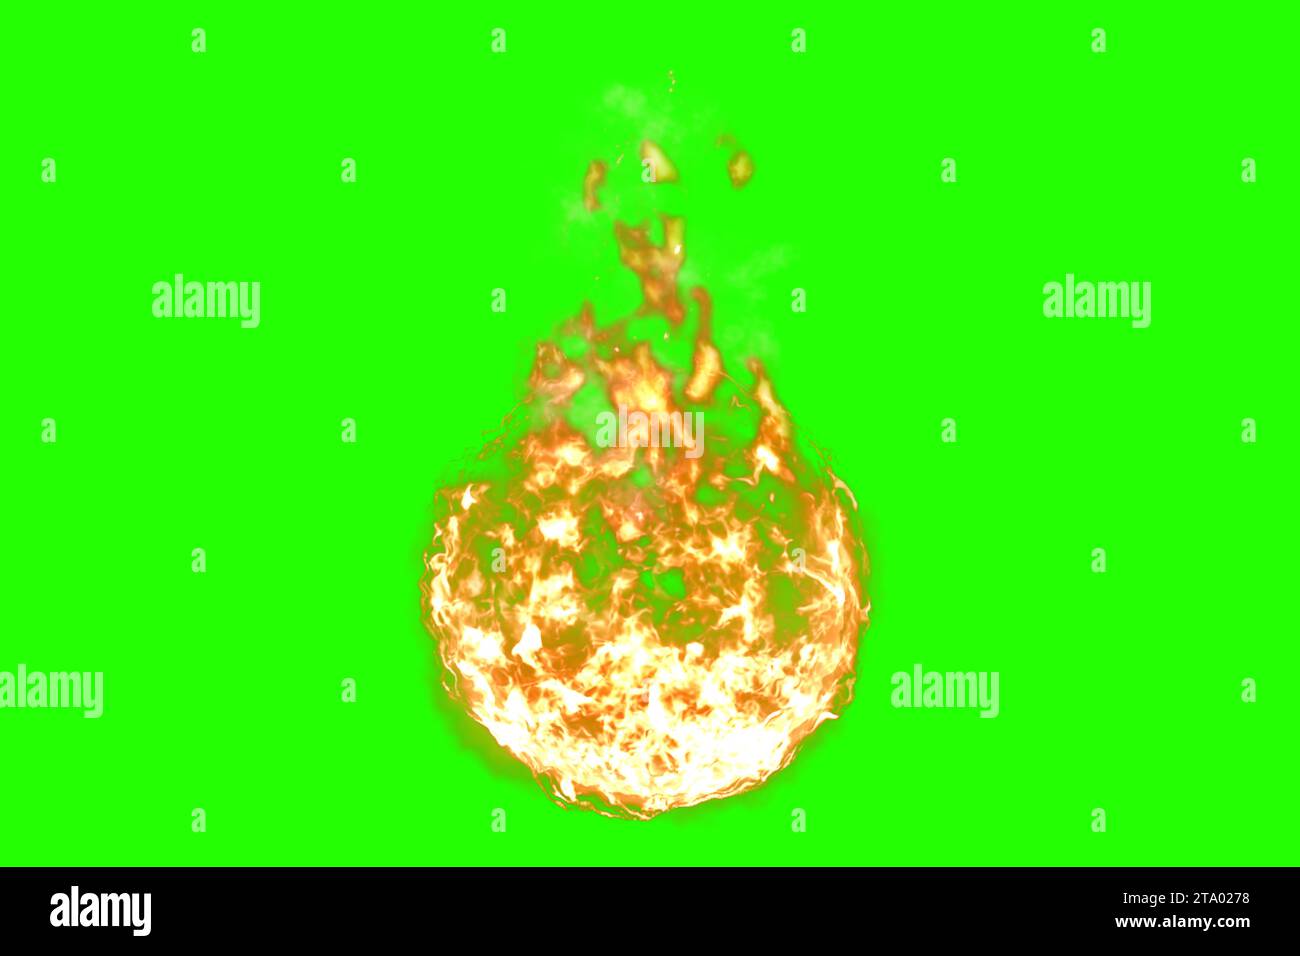 3D rendering, ball of flame fire with smoke in chroma key green screen background, dangerous flame concept Stock Photo